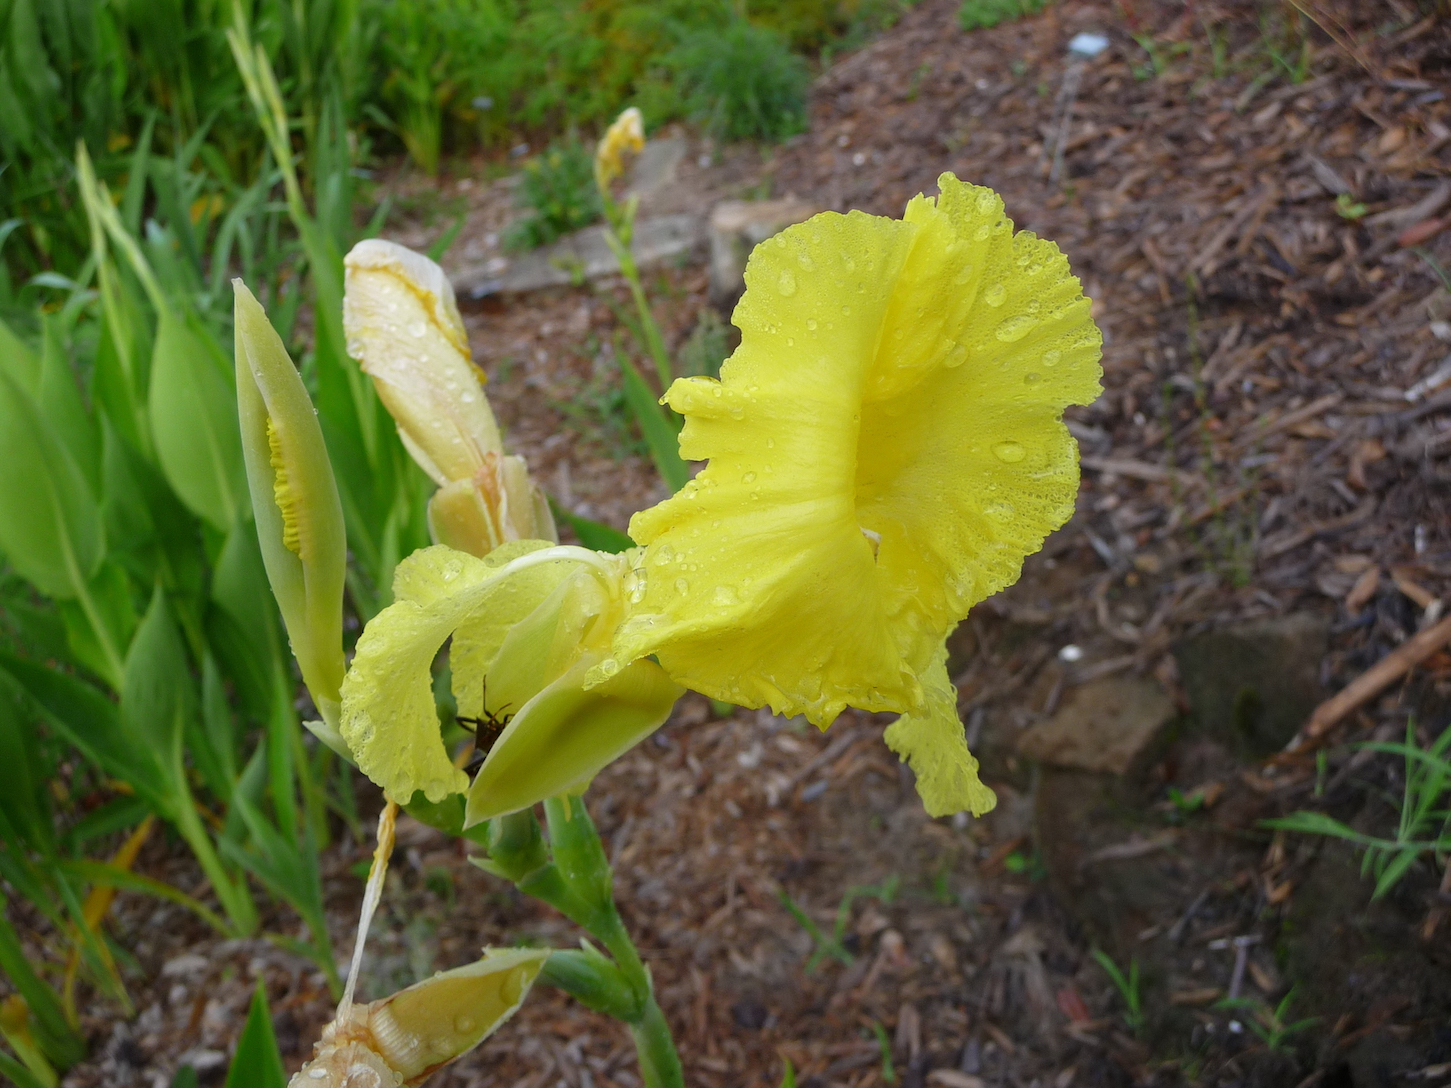 The Scientific Name is Canna flaccida. You will likely hear them called Golden Canna, Yellow Canna, Bandana-of-the-Everglades. This picture shows the Cultivated from a local source so flowers are larger than typically found in the wild. of Canna flaccida